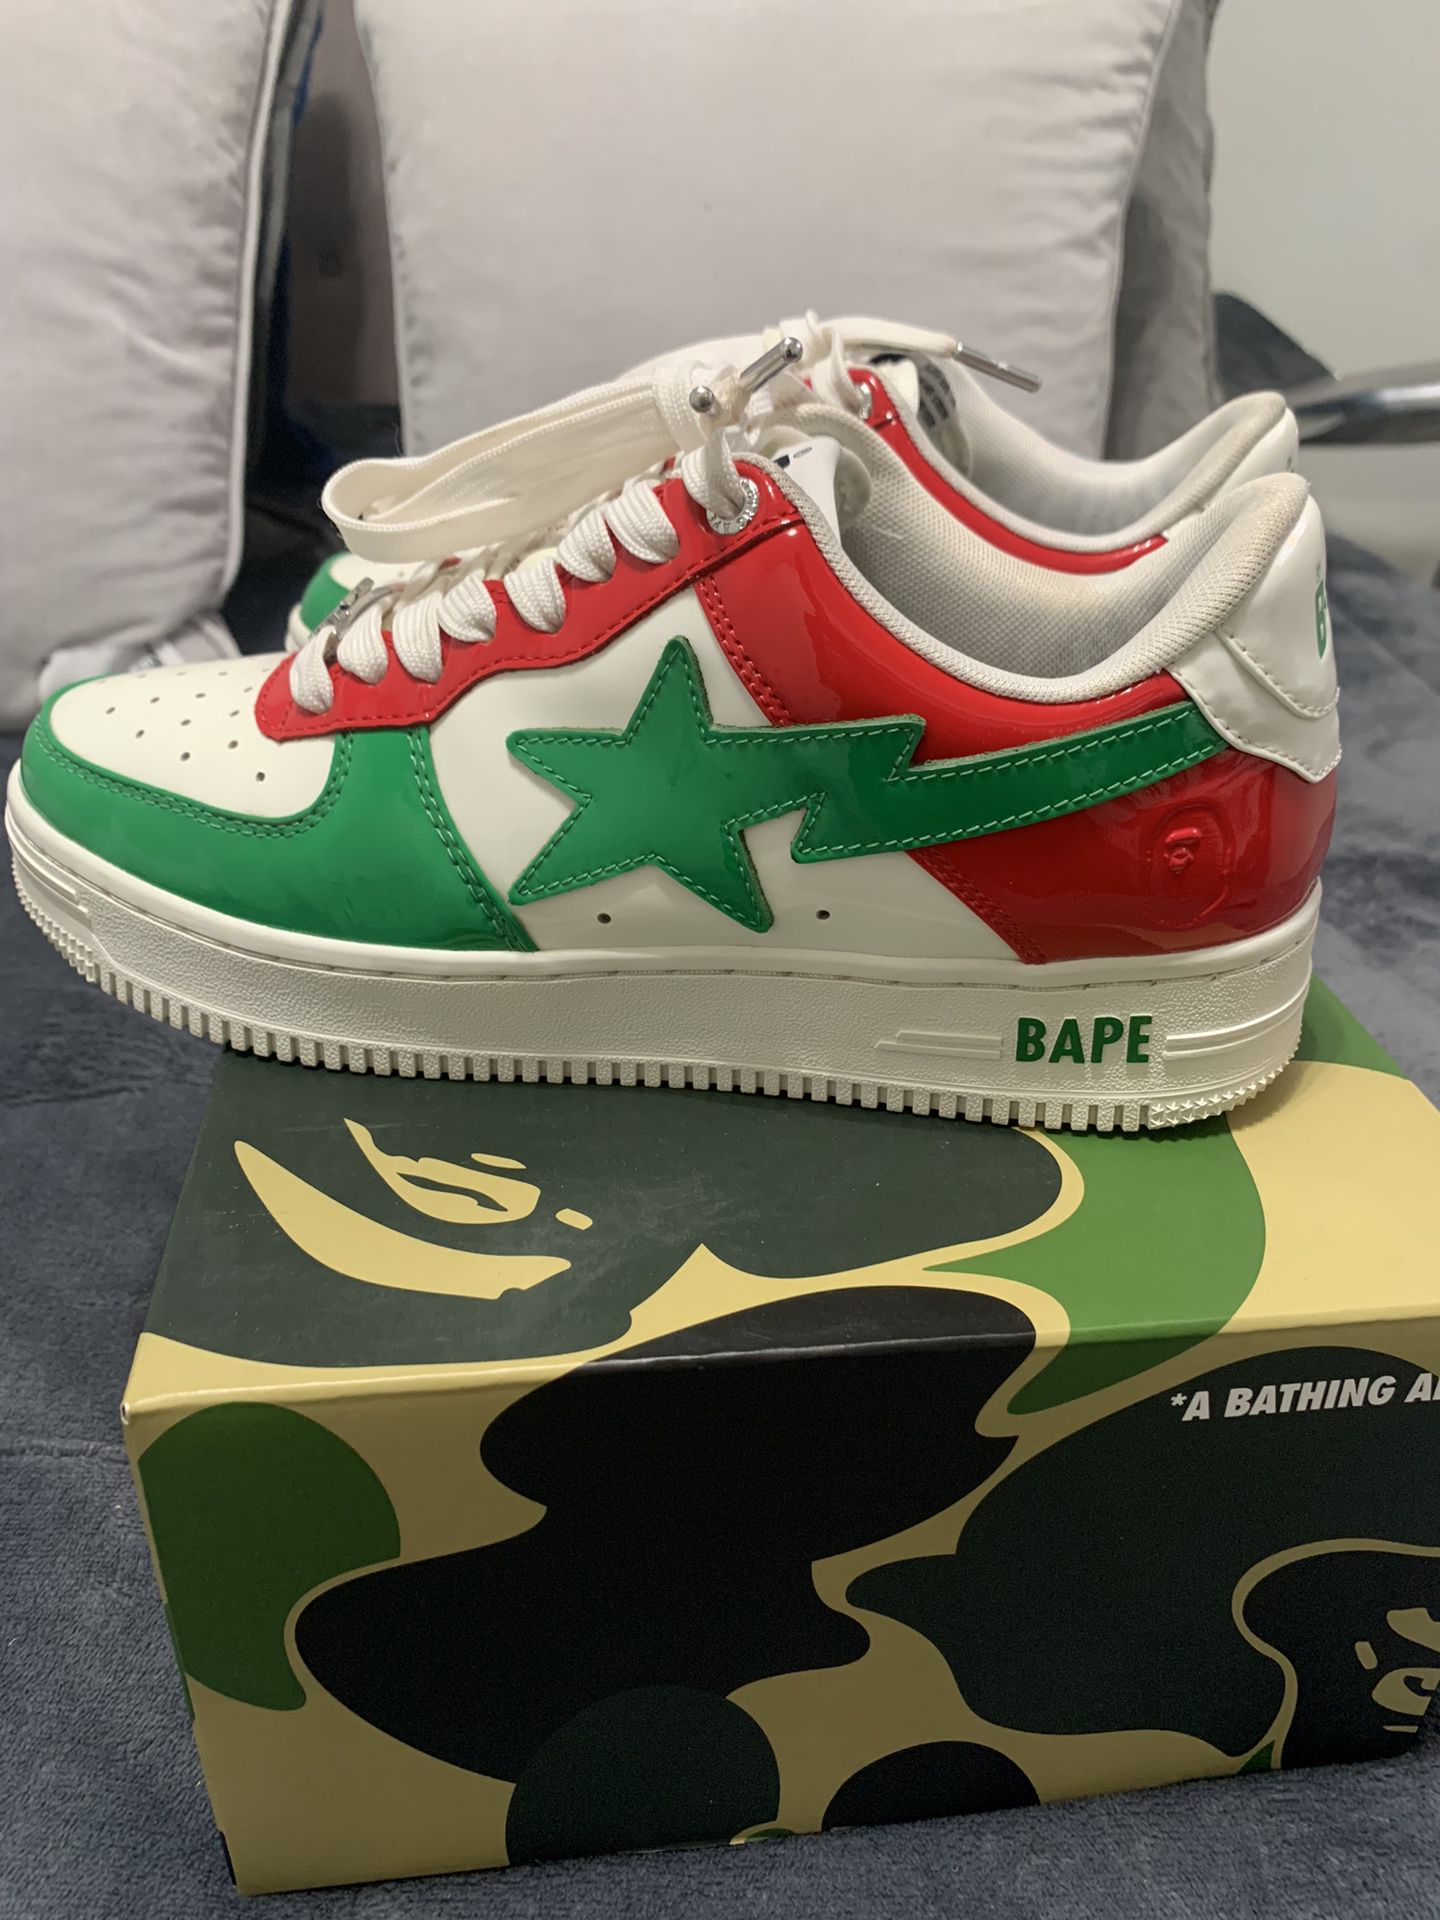 Bapestas Italy for Sale in Chino, CA - OfferUp